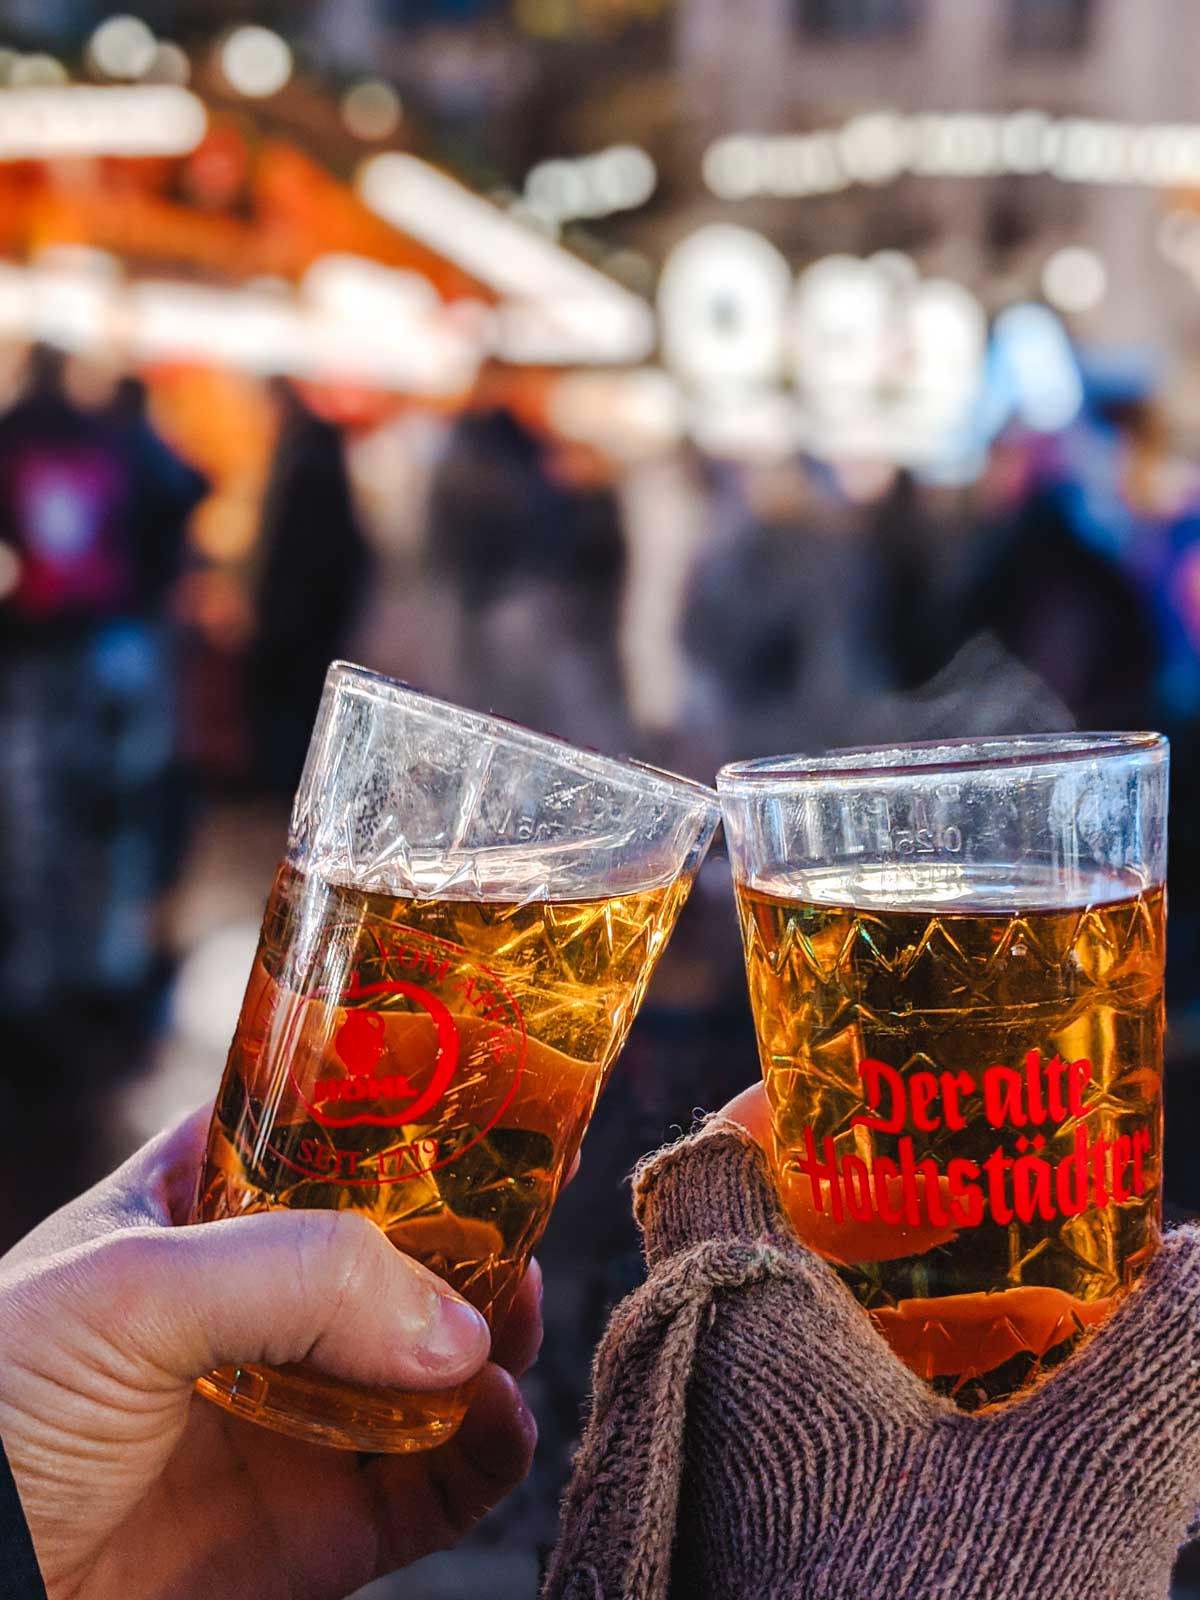 Two hands holding glasses of apfelwein with Frankfurt Christmas market in background.